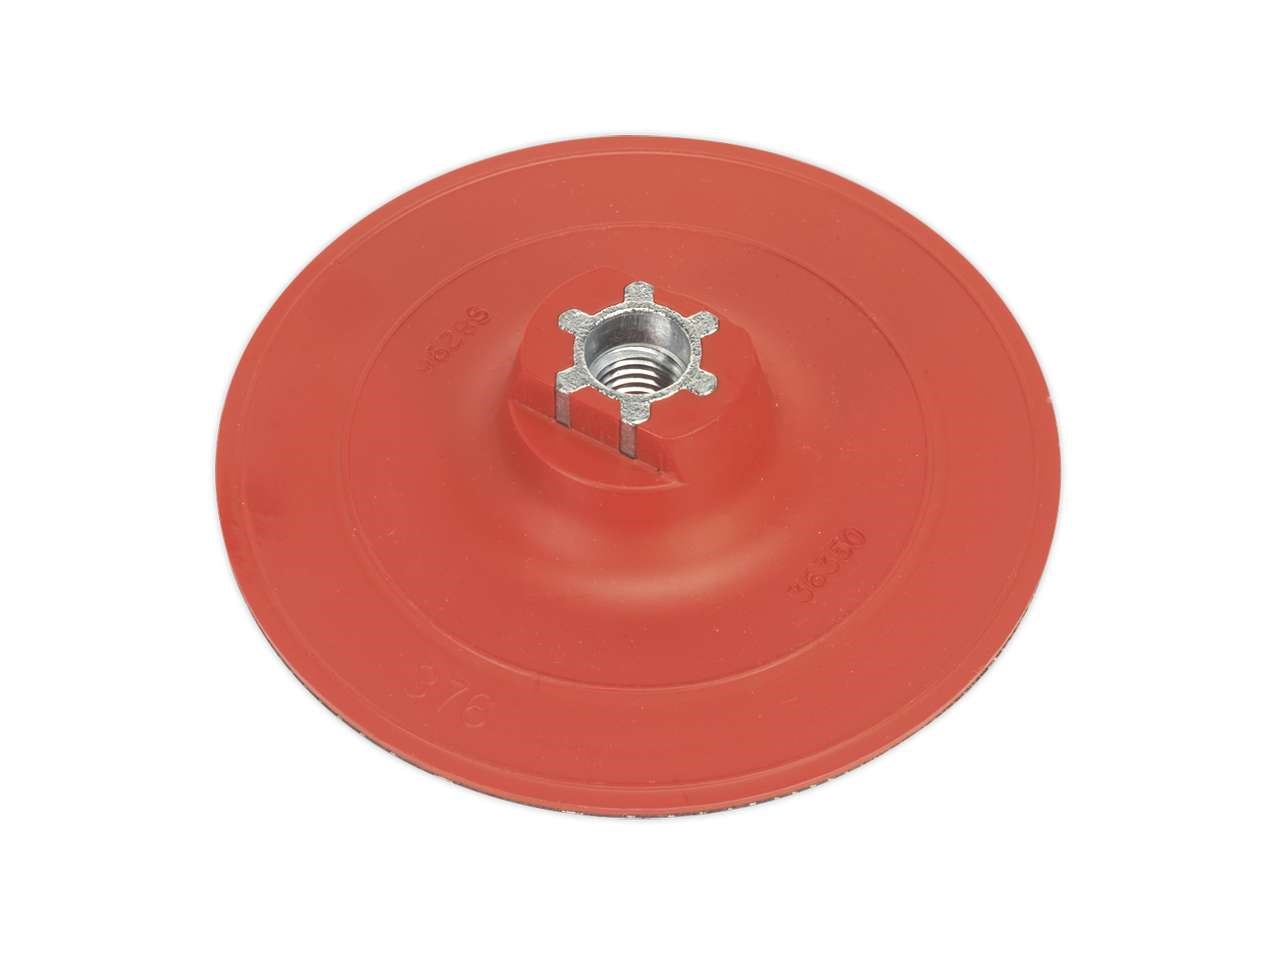 Sealey PTCBPV3 Hook and Loop Backing Pad 117mm x M14